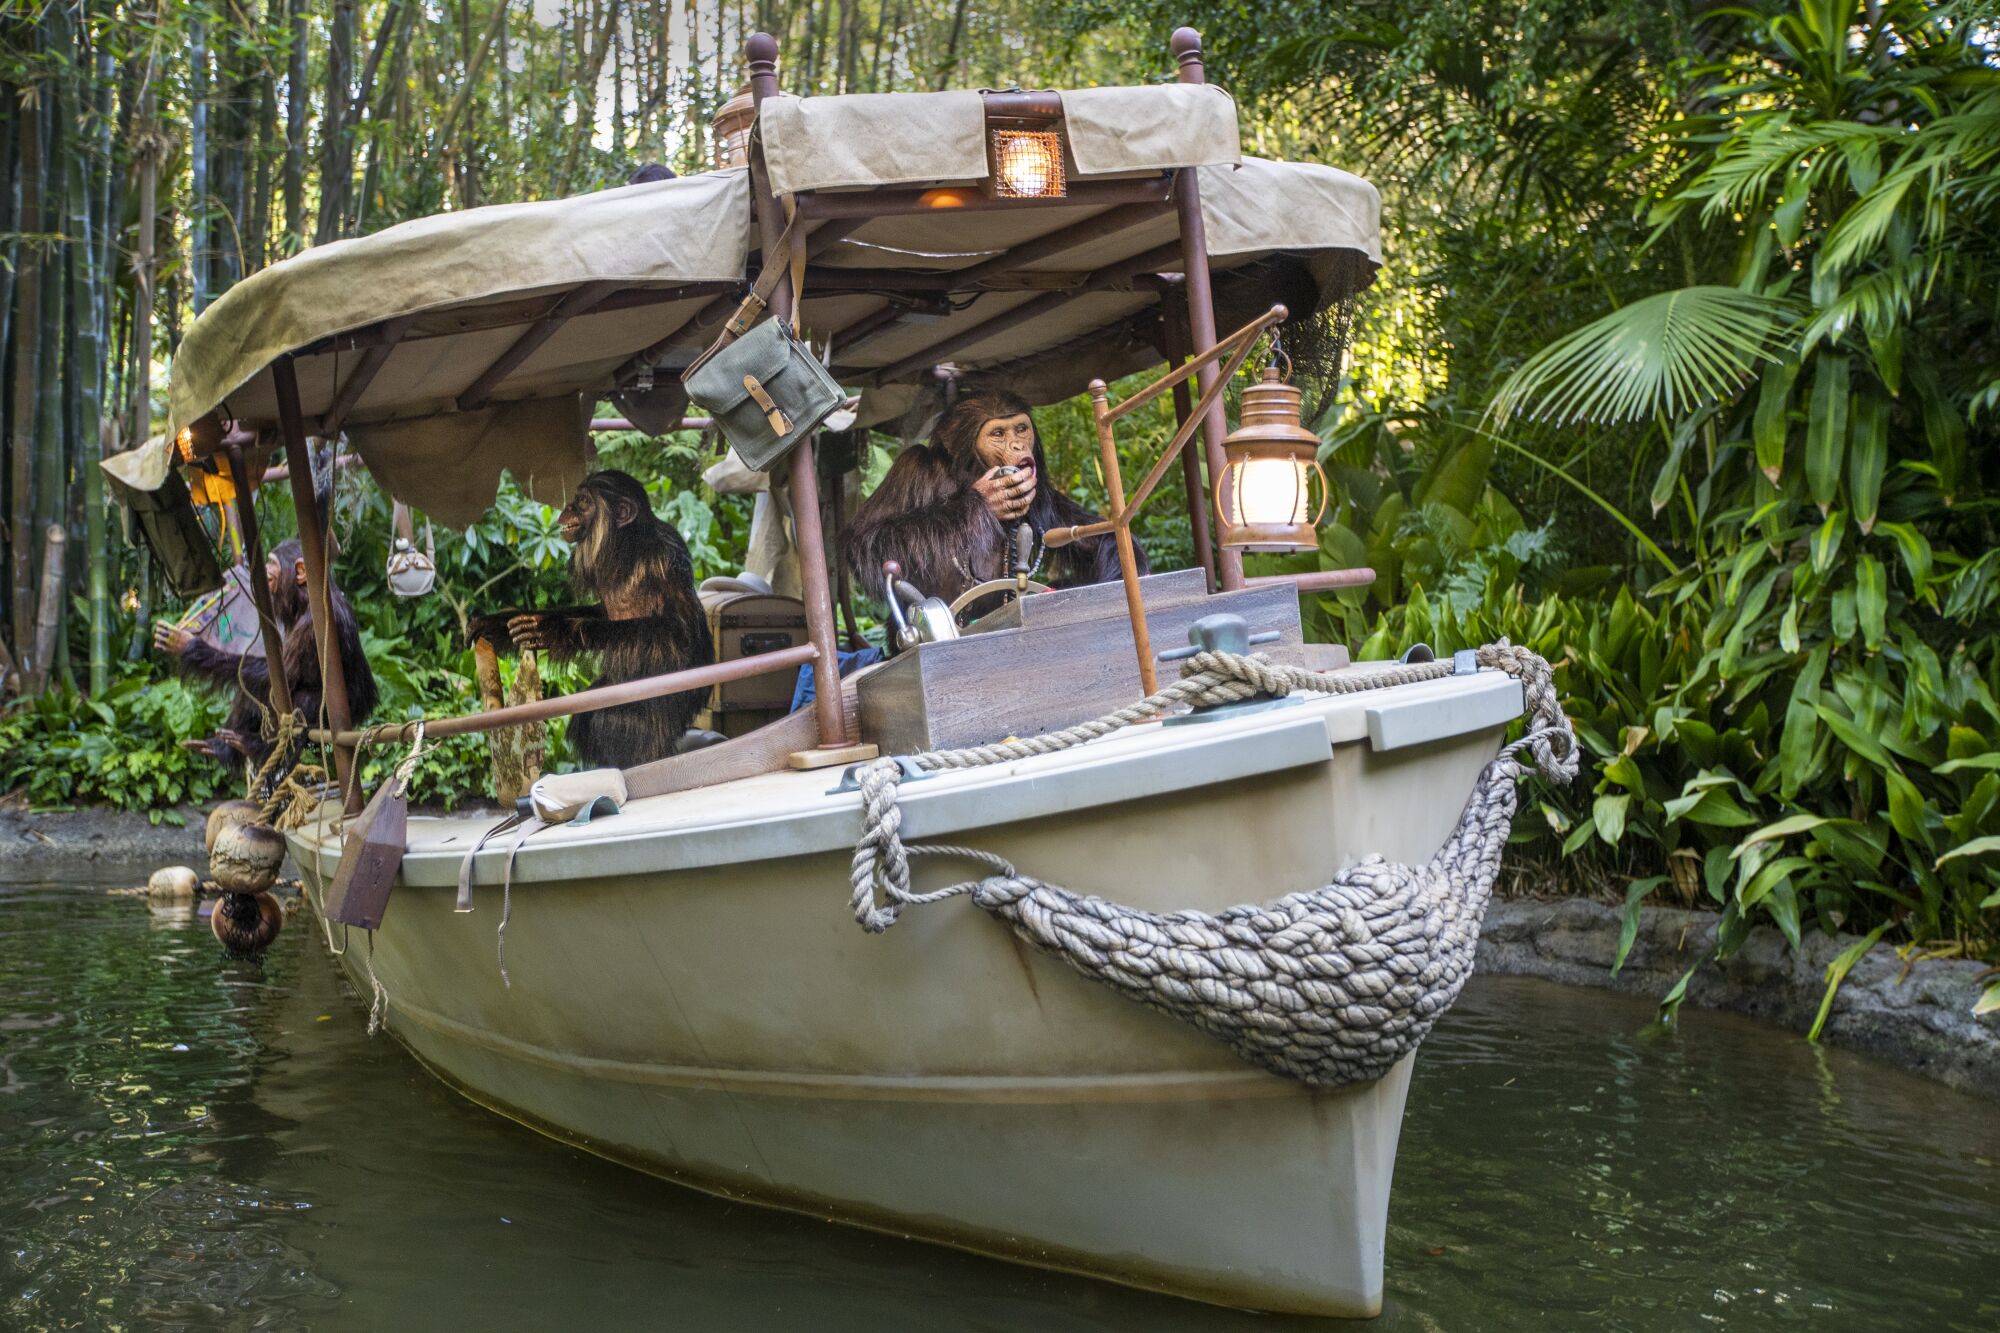 An expedition's wrecked boat taken over by chimpanzees is seen from the Jungle Cruise ride